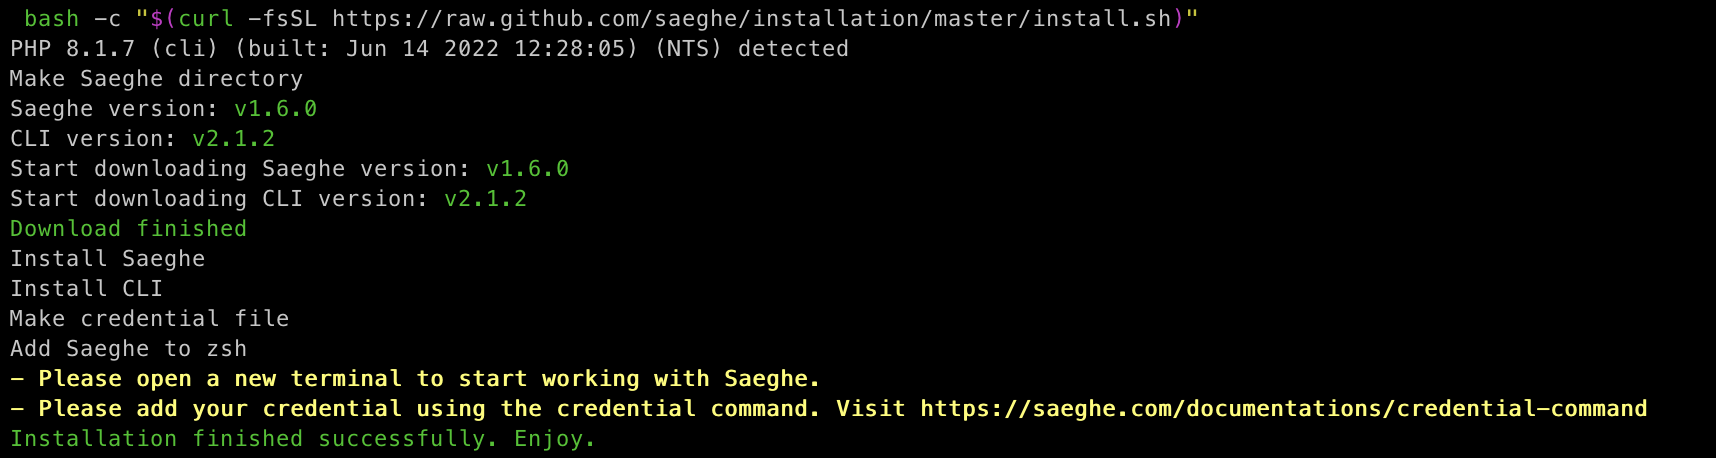 Saeghe installation with installer script